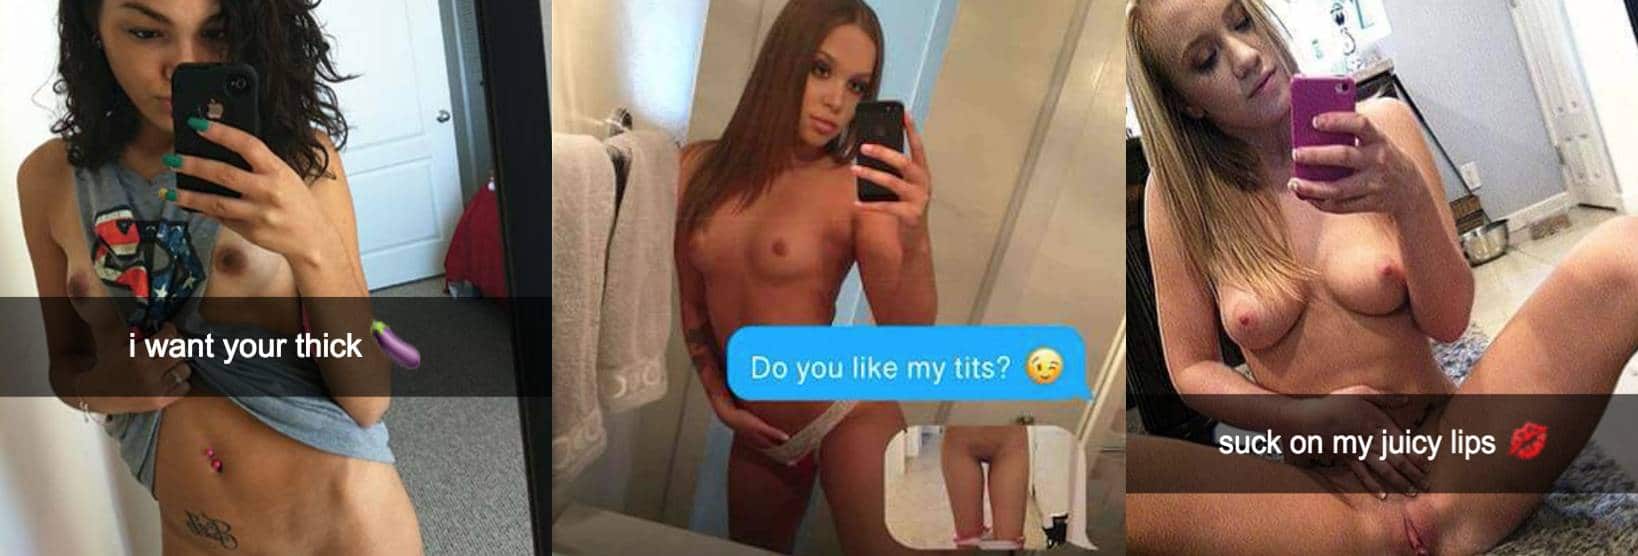 best of Found sexting with snap girl